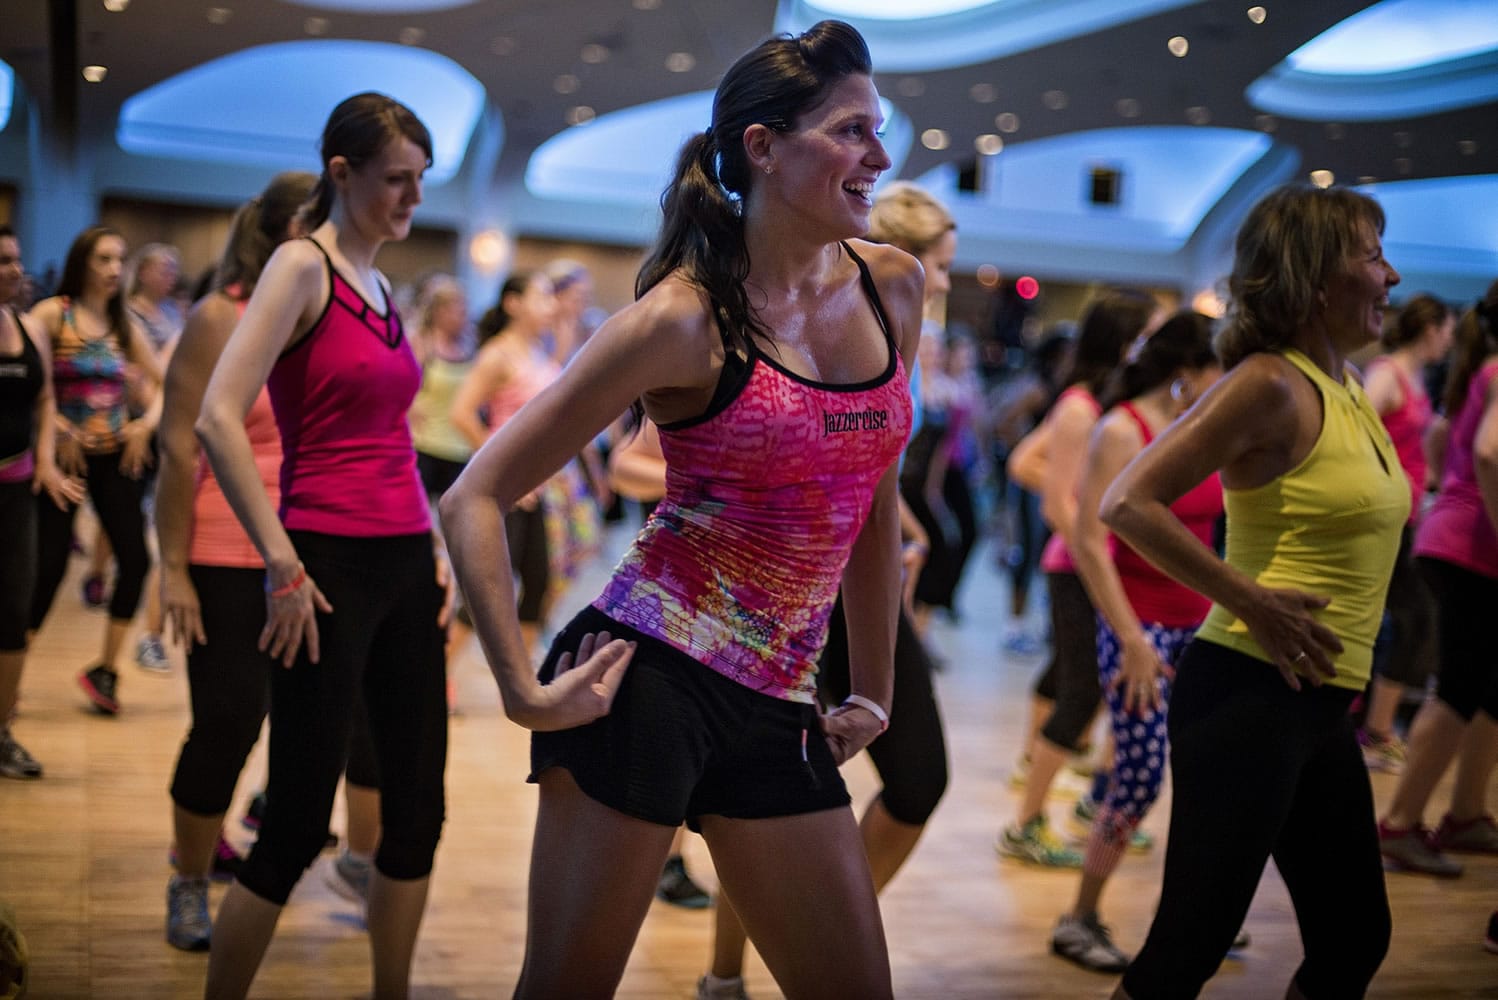 Kristen Smith of Linthicum, Md., dances at a Jazzercise Live event led by Jazzercise founder Judi Sheppard Missett; Jazzercise Live is  an annual event that swoops into a new city each year. Illustrates HEALTH-EXERCISE (category l), by Vicky Hallett, (c) 2014, The Washington Post.  Moved Wednesday, July 09, 2014. (MUST CREDIT: Photo by J.